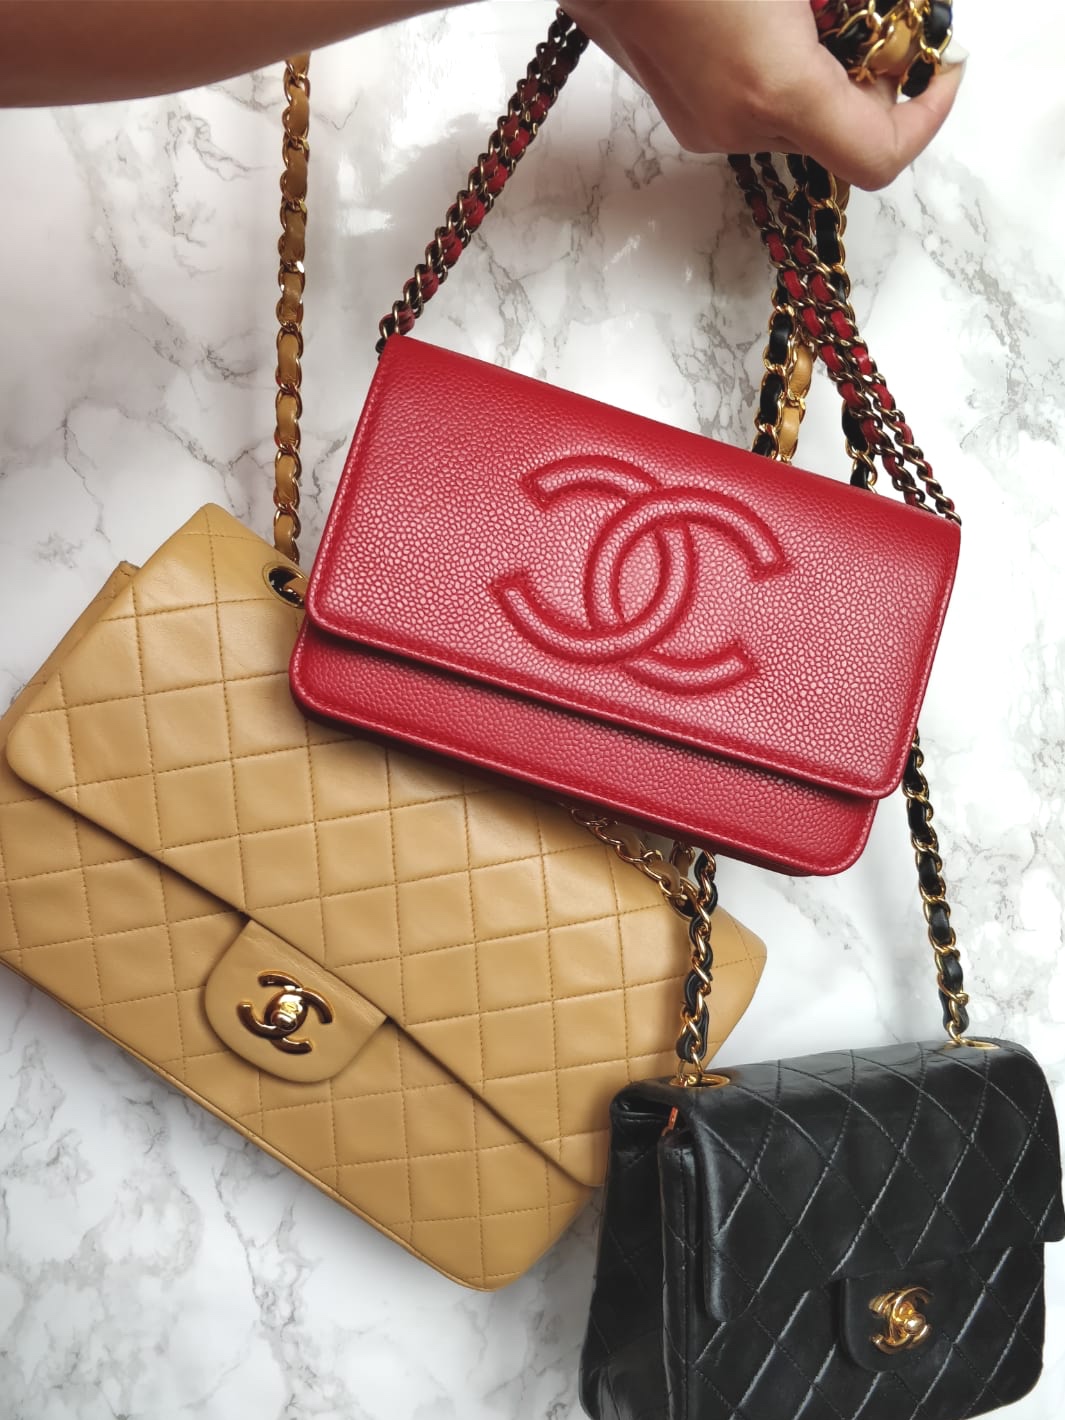 chanel purse online shopping